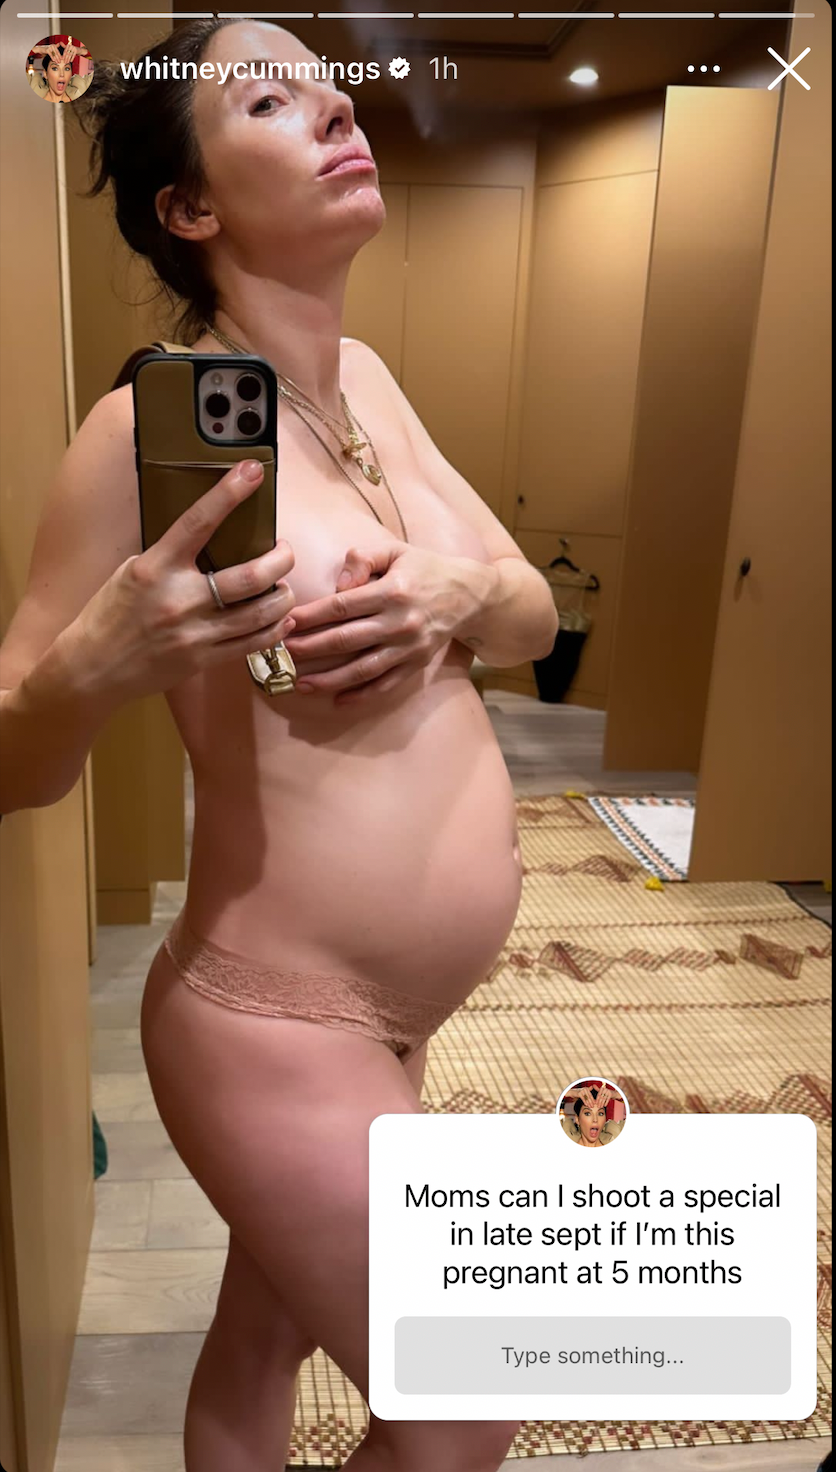 Whitney Cummings shared almost nude pregnancy photo